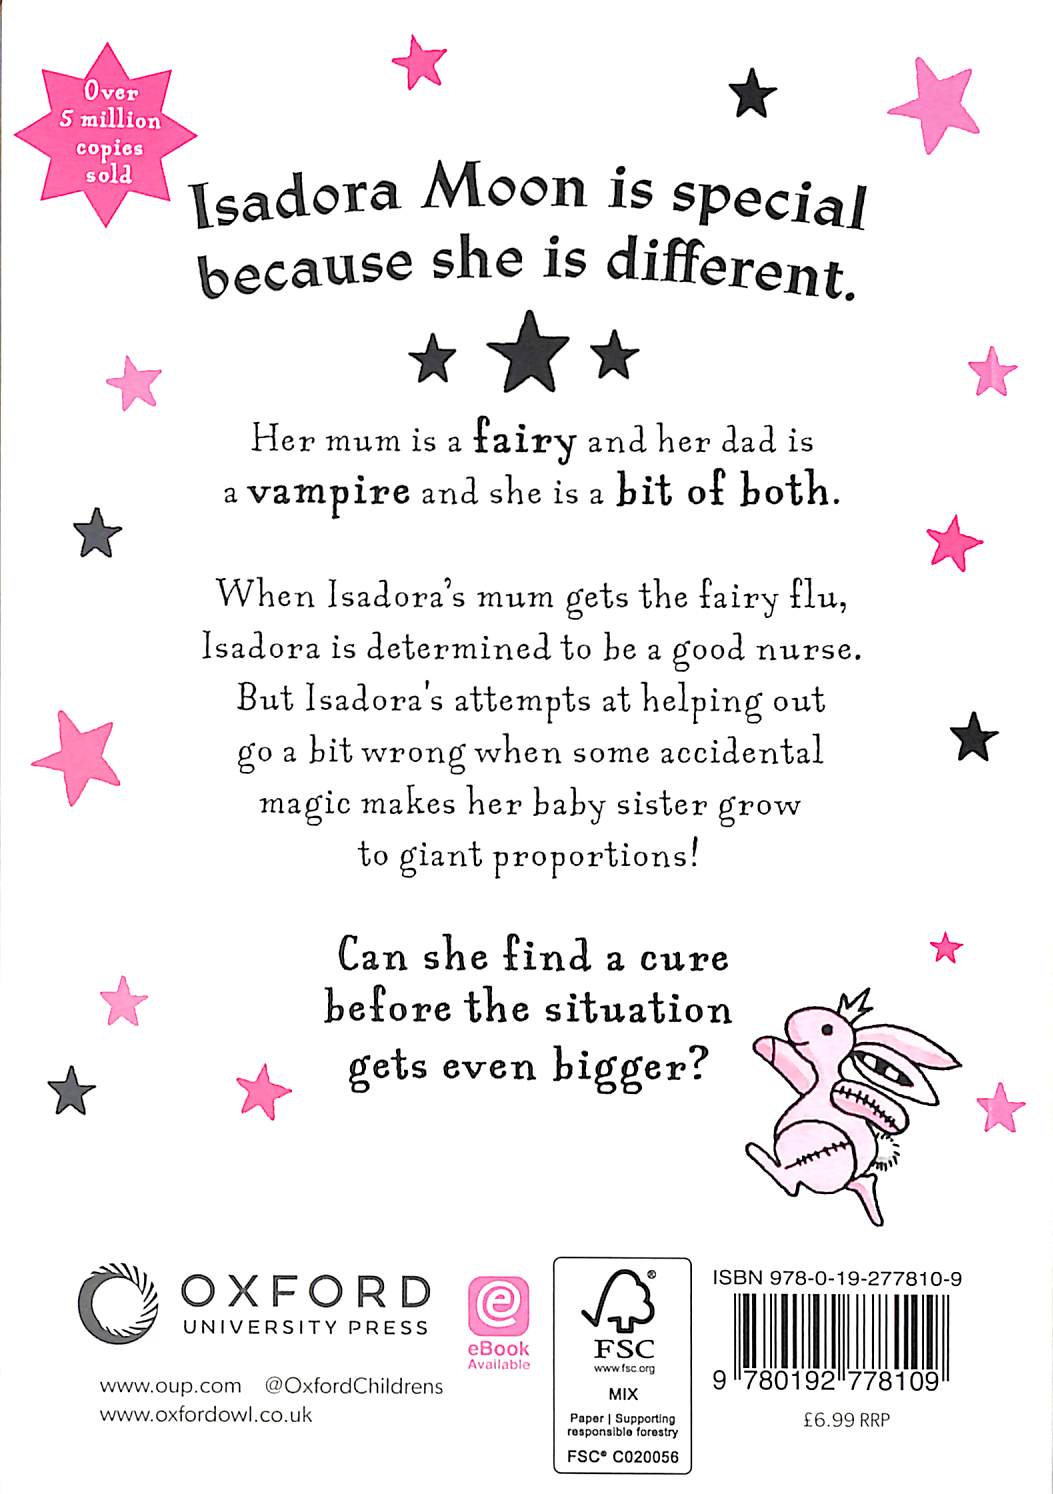 Isadora Moon helps out by Harriet Muncaster